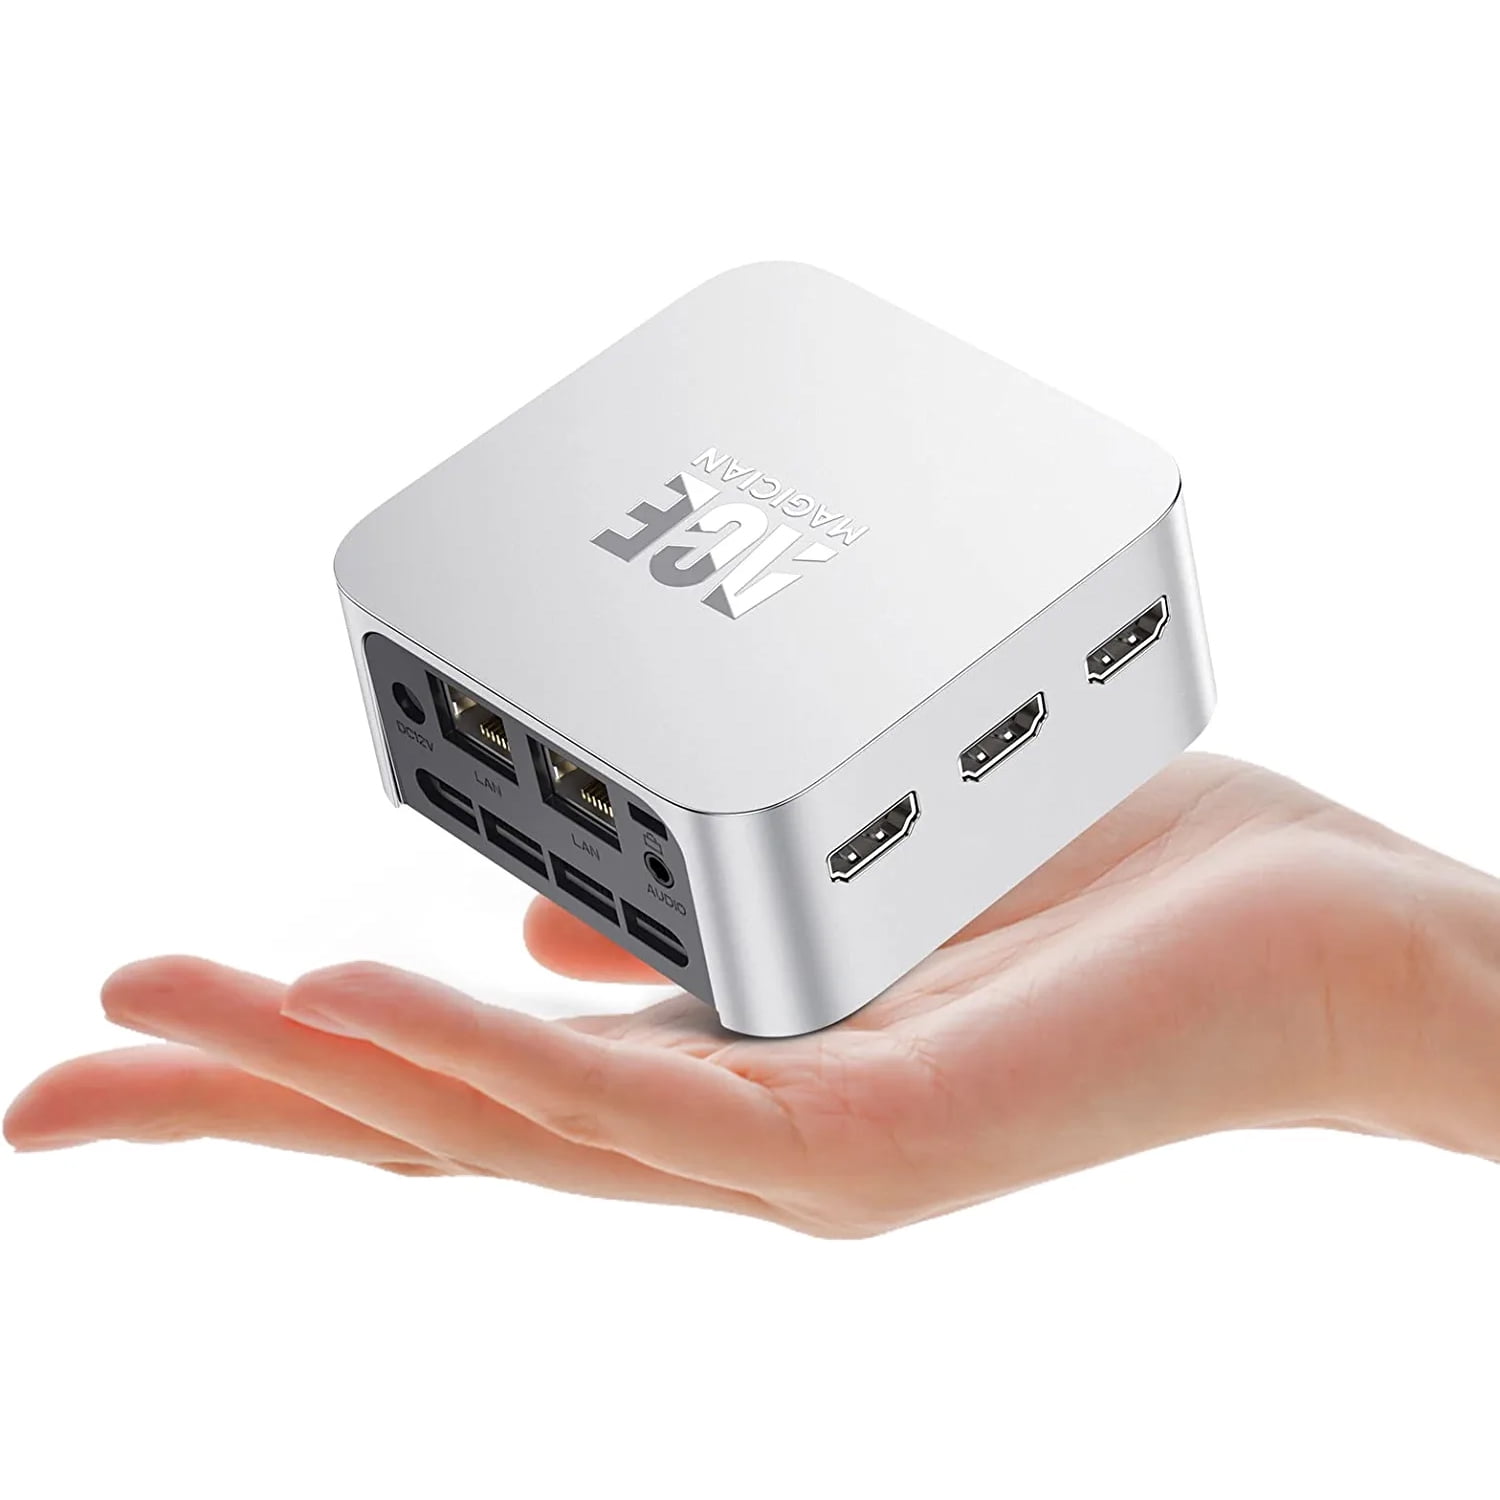 Mini PC With Off-Roadmap Intel Processor N95 Chip Appears at Retail